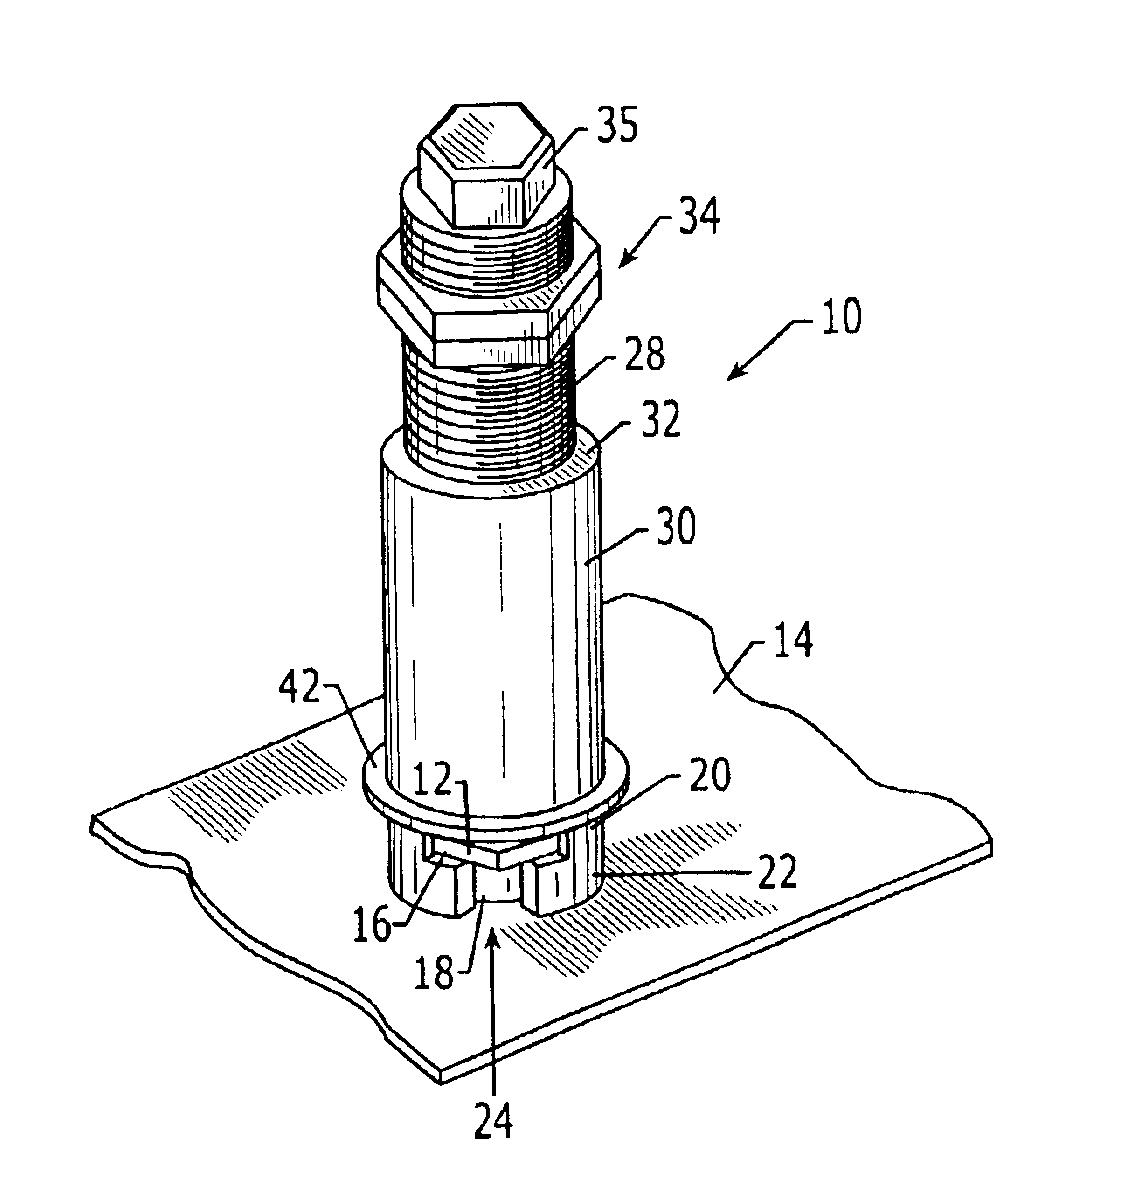 Apparatus for removing a fastener from a workpiece